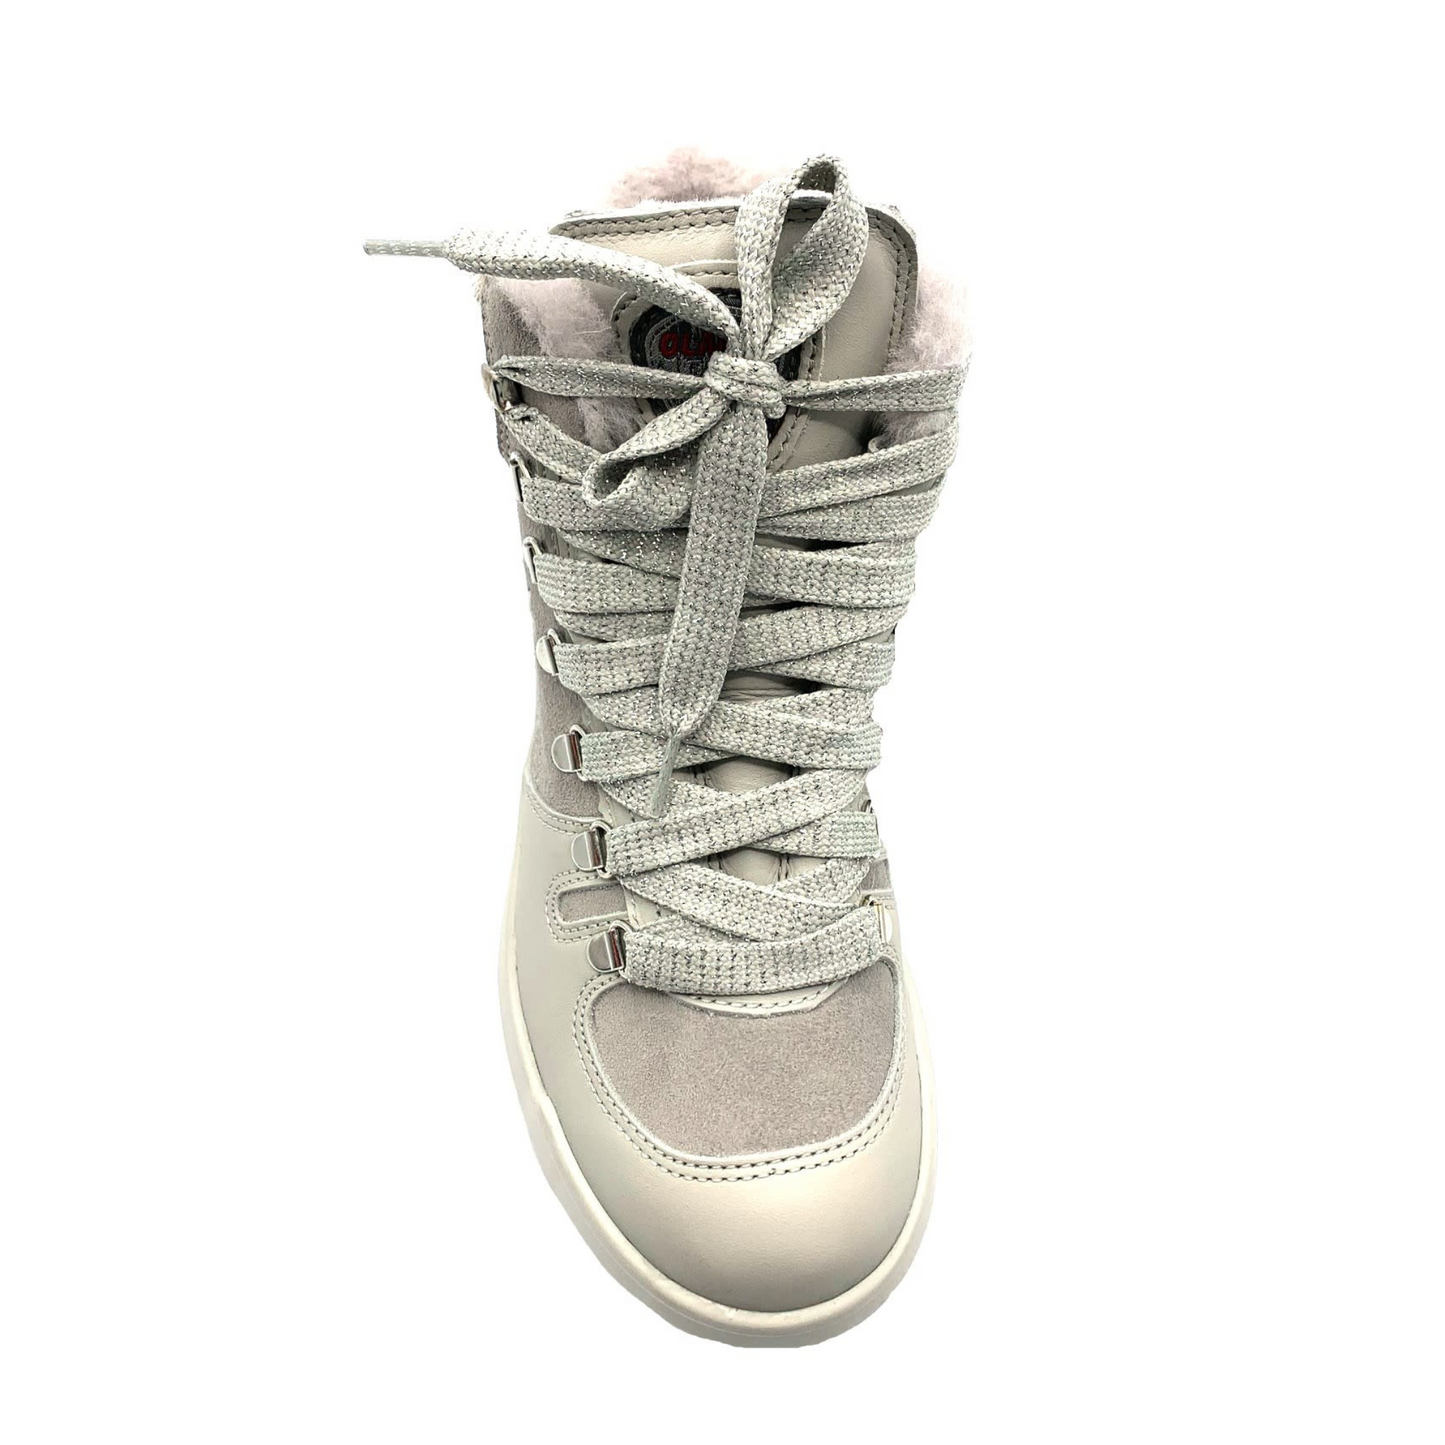 A front view of a light grey lace-up boot.